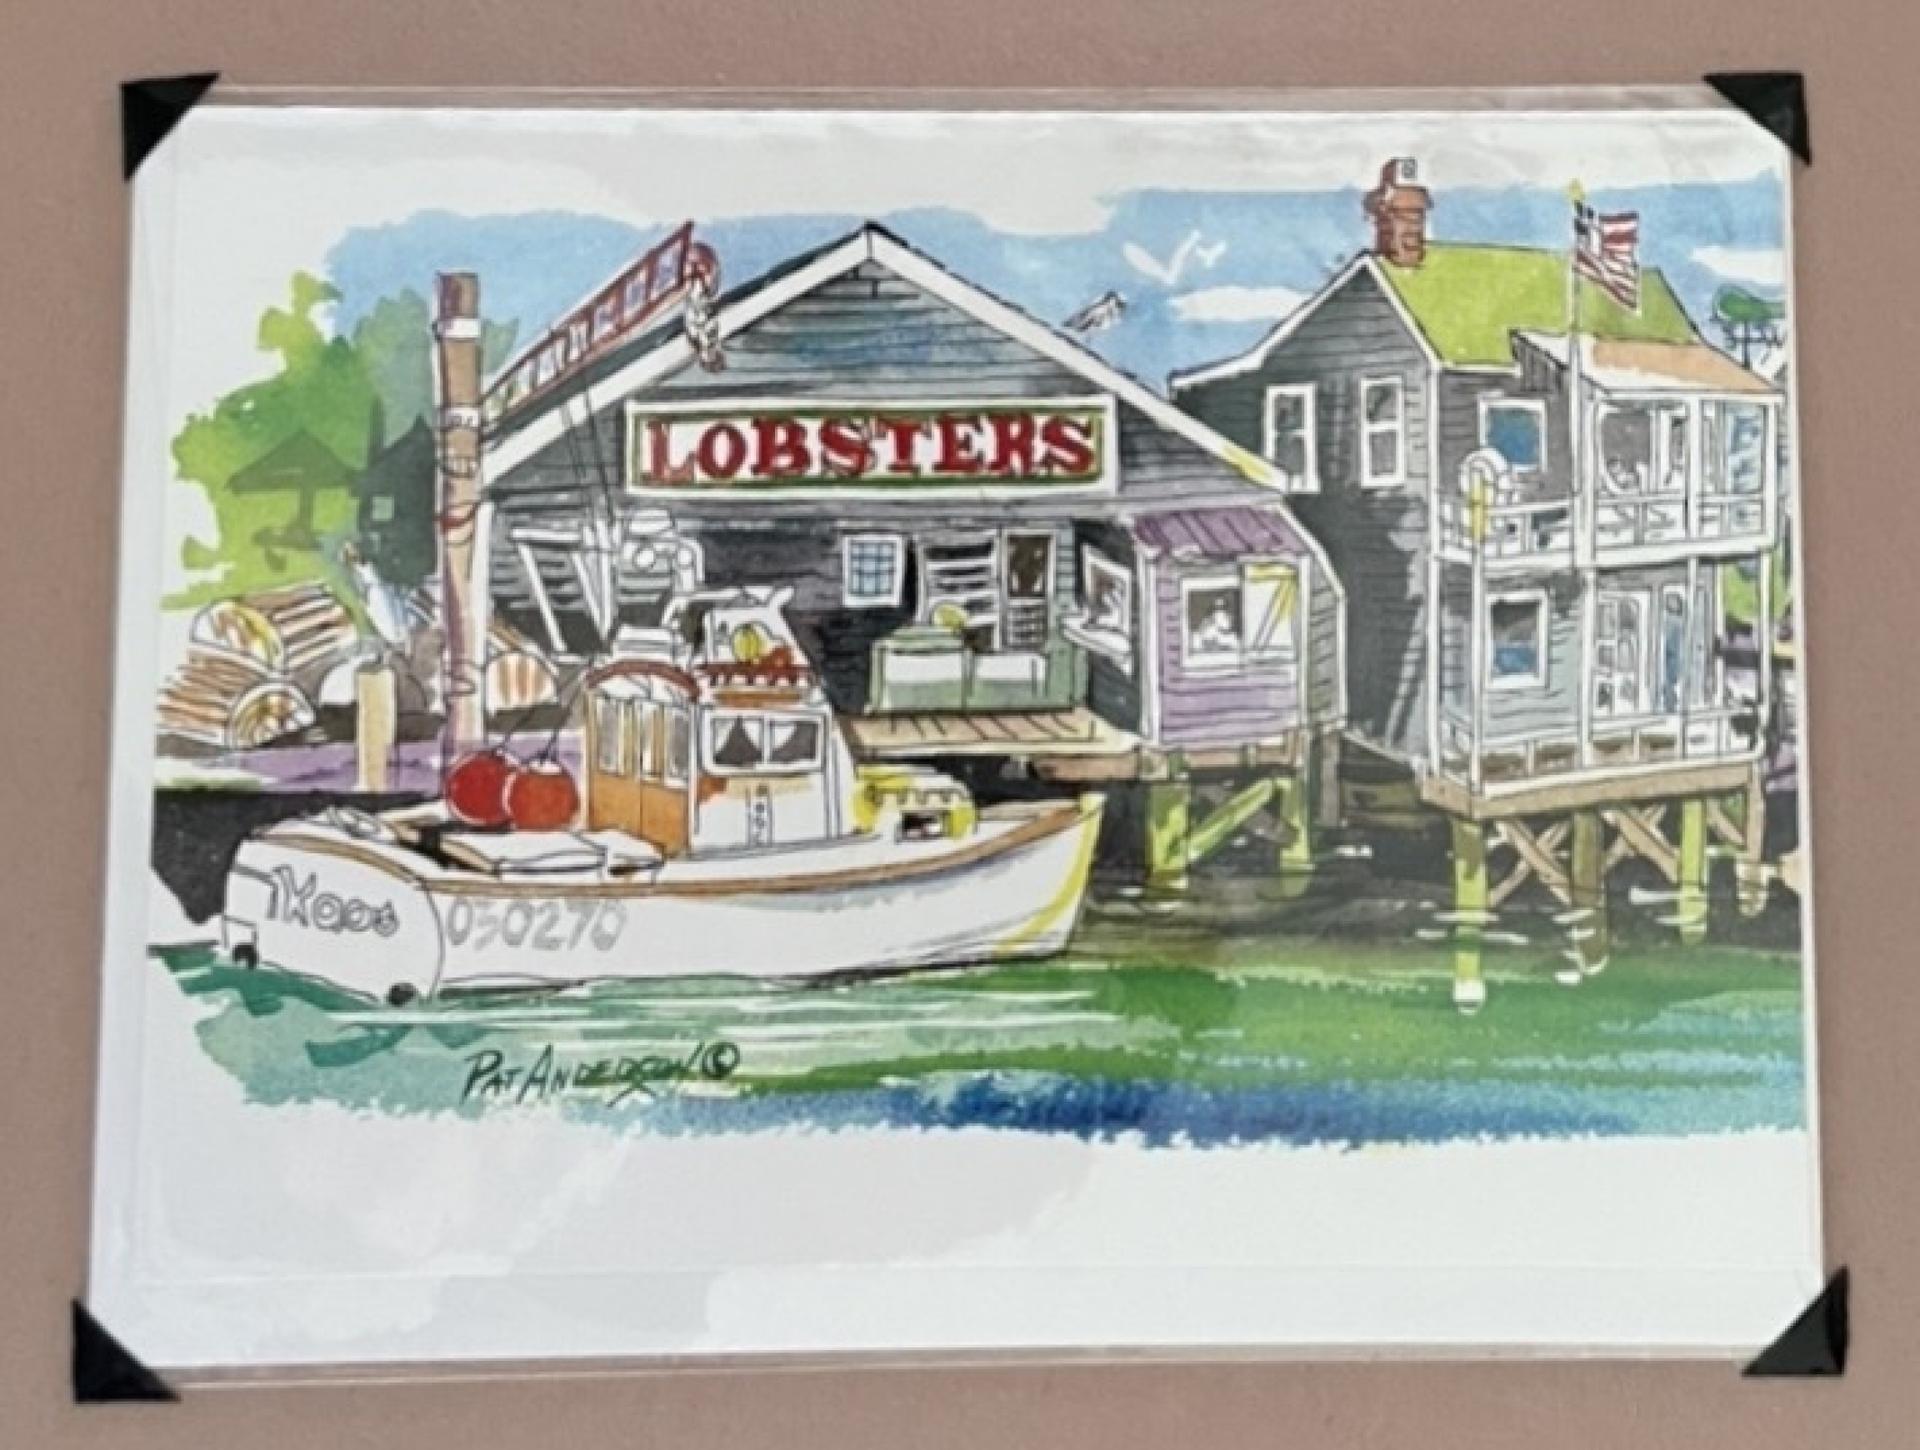 A drawing of Pennel Ames’s boat moored next to a restaurant in Nantucket, Massachusetts.